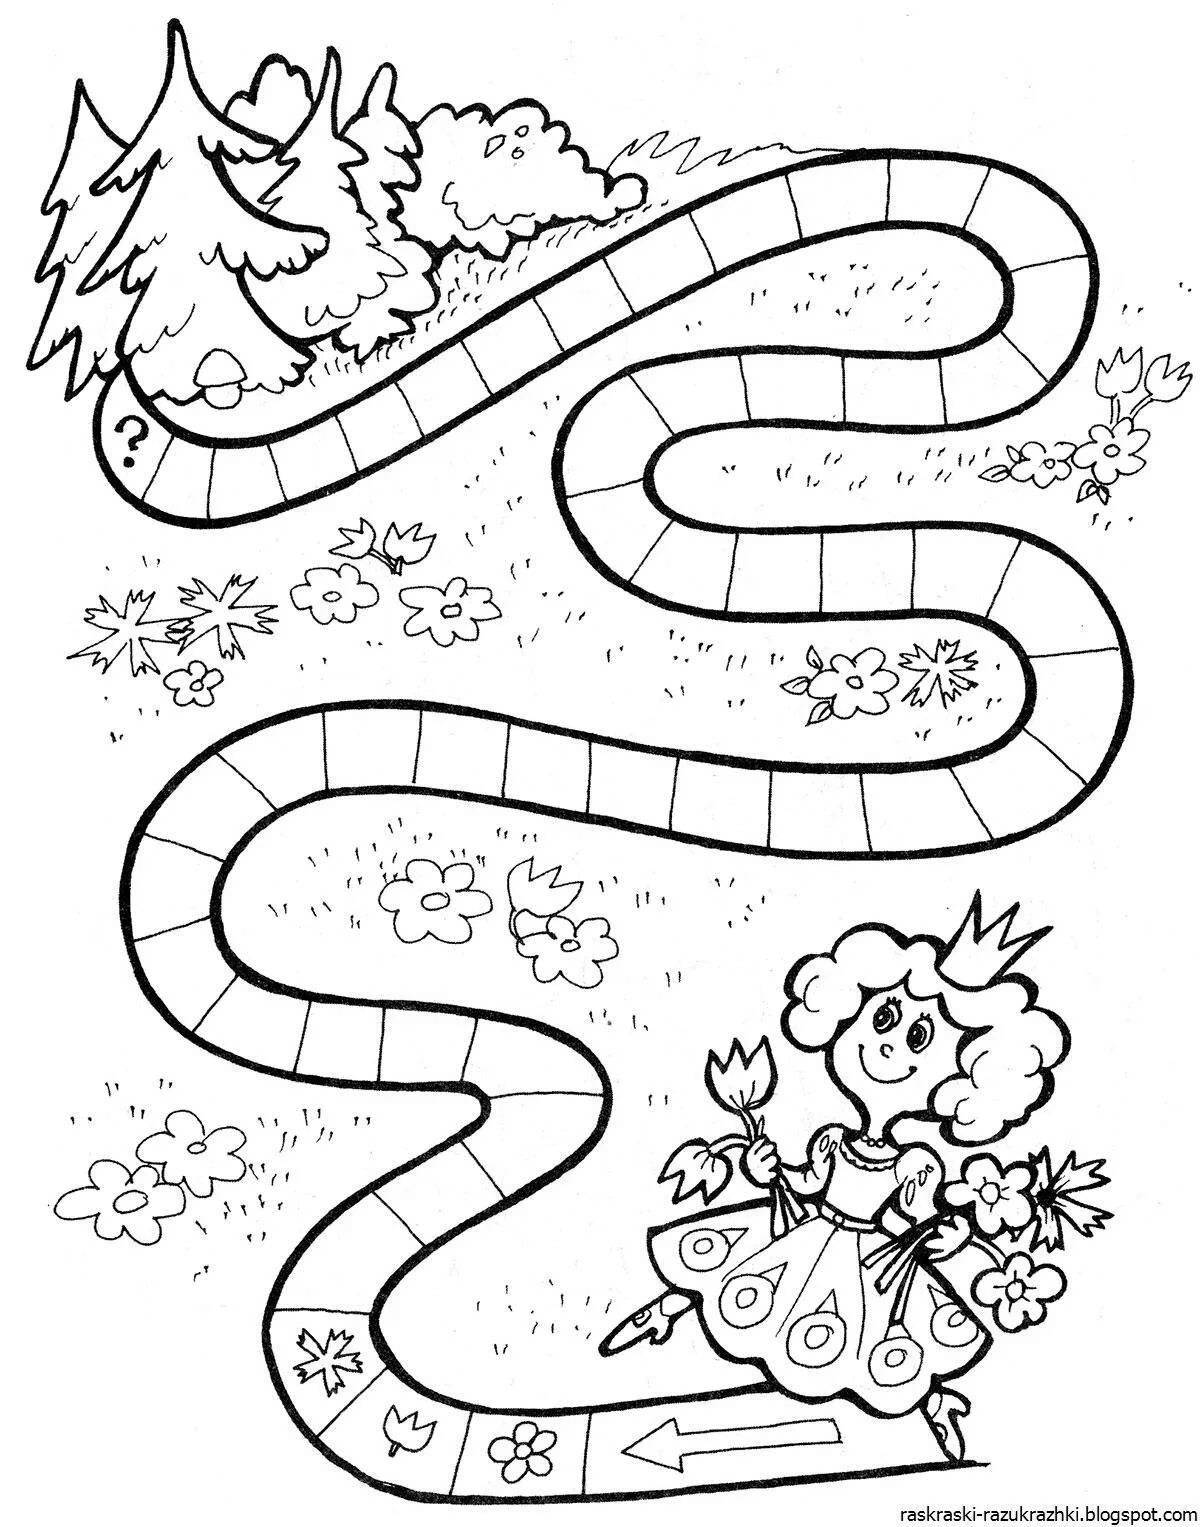 Relaxing coloring book with tasks